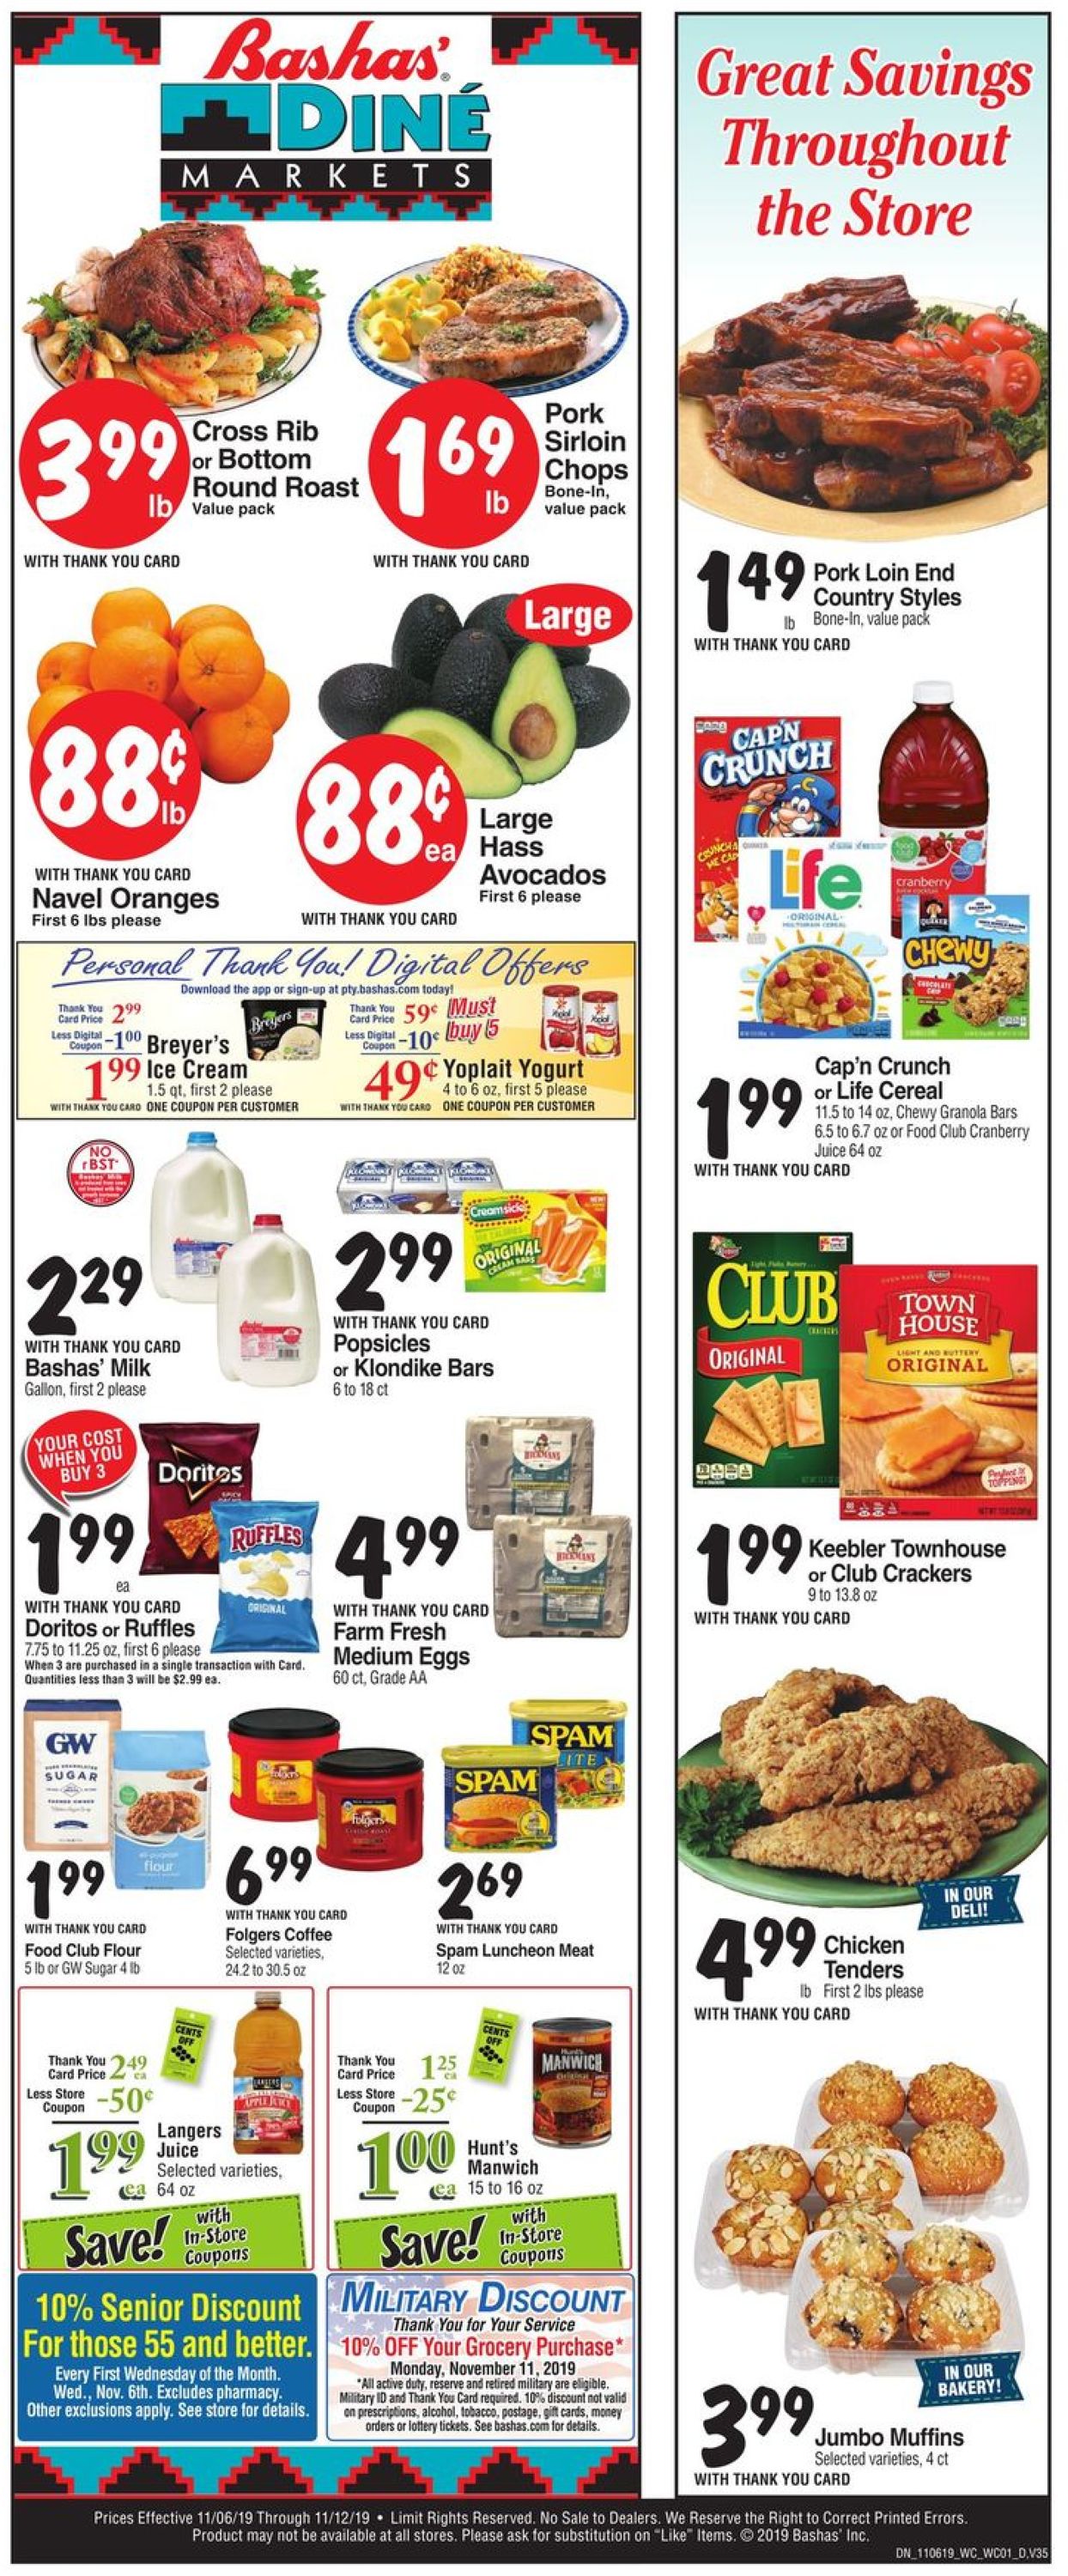 Bashas Current weekly ad 11/06 - 11/12/2019 [2] - frequent-ads.com